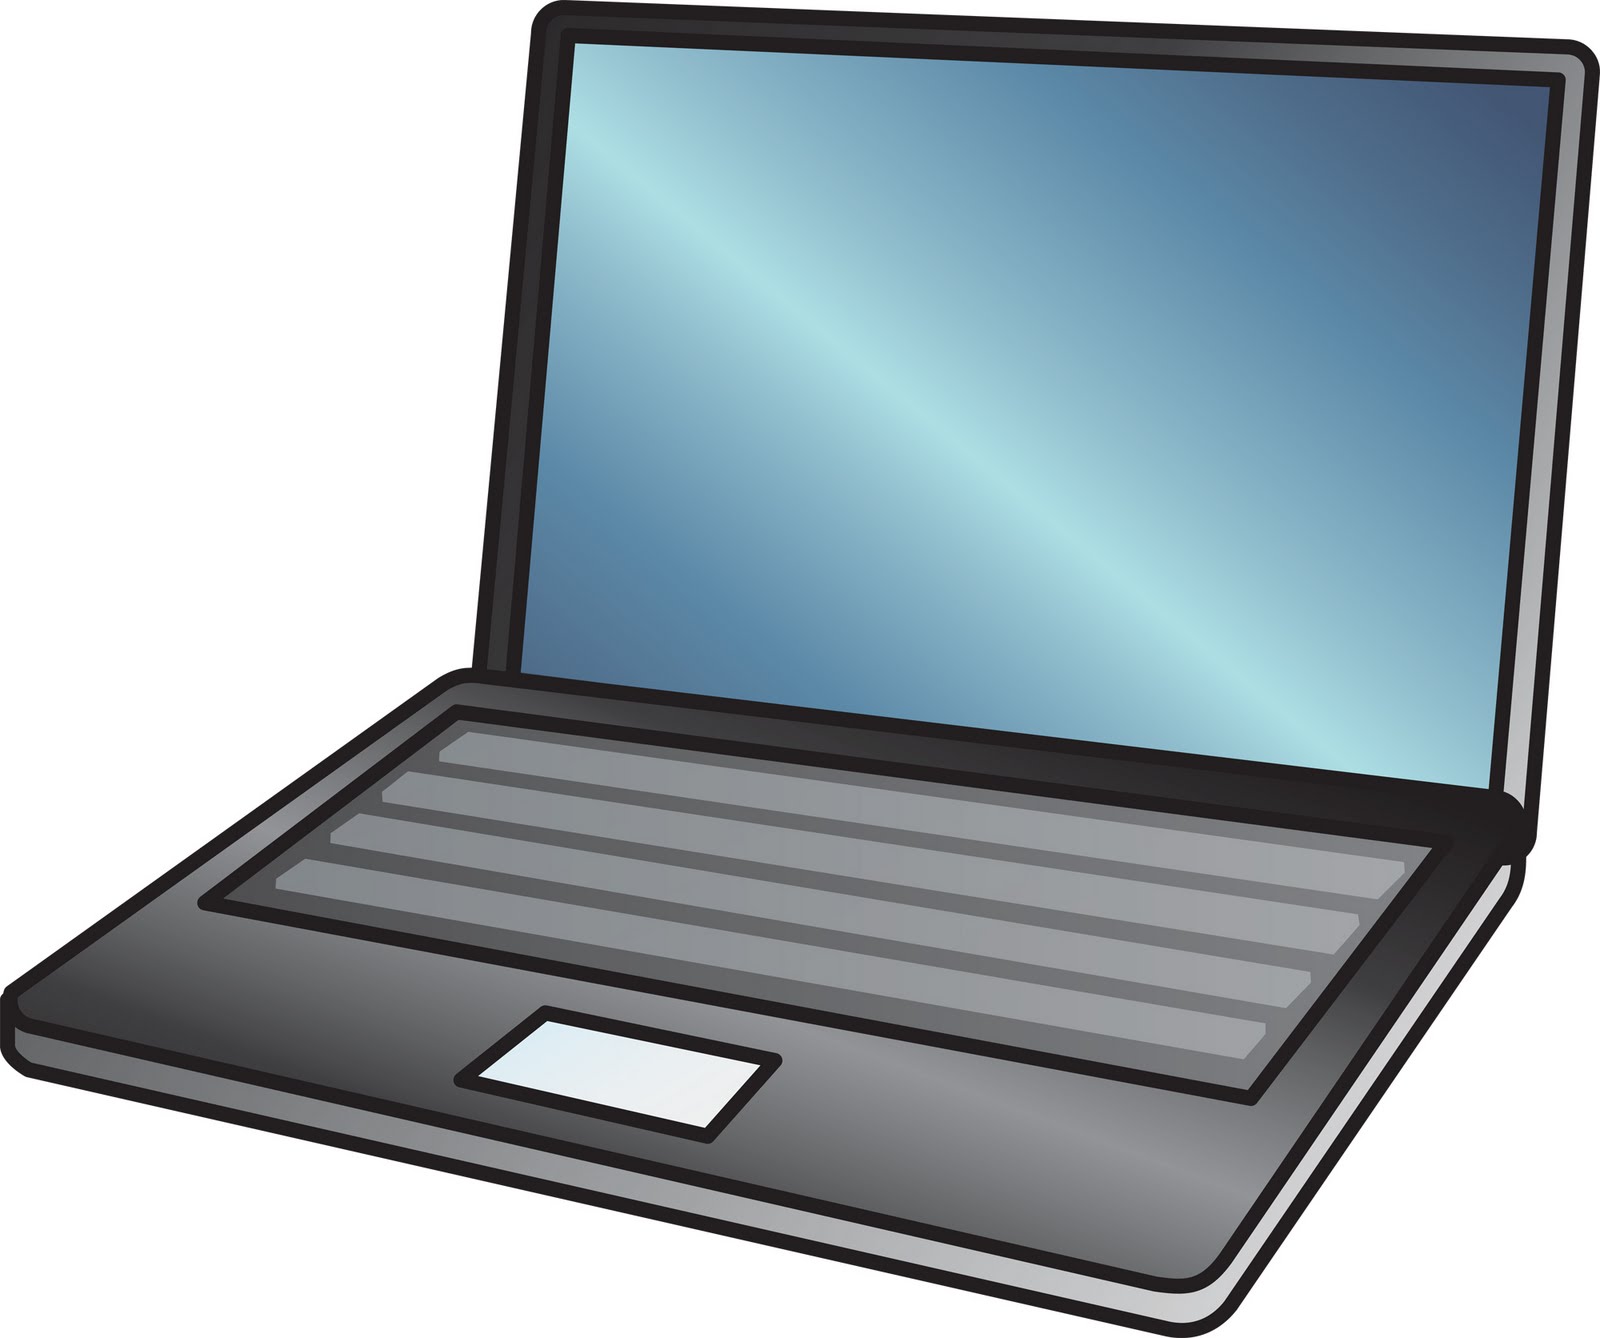 Computer Forputer Png Image Clipart